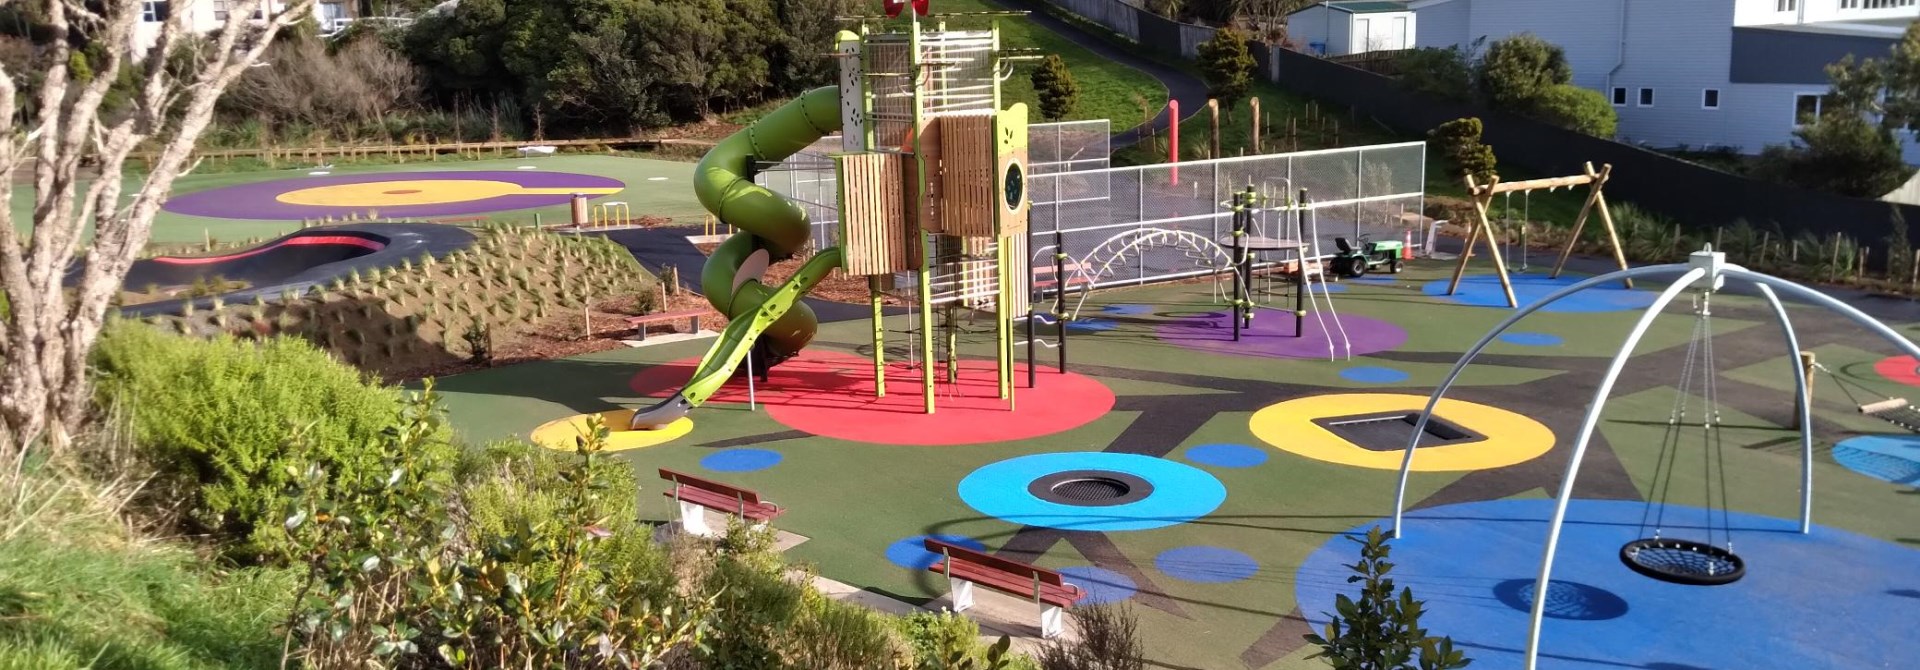 Pukehuia Park in Newlands is due to be officially opened with a blessing and ceremony